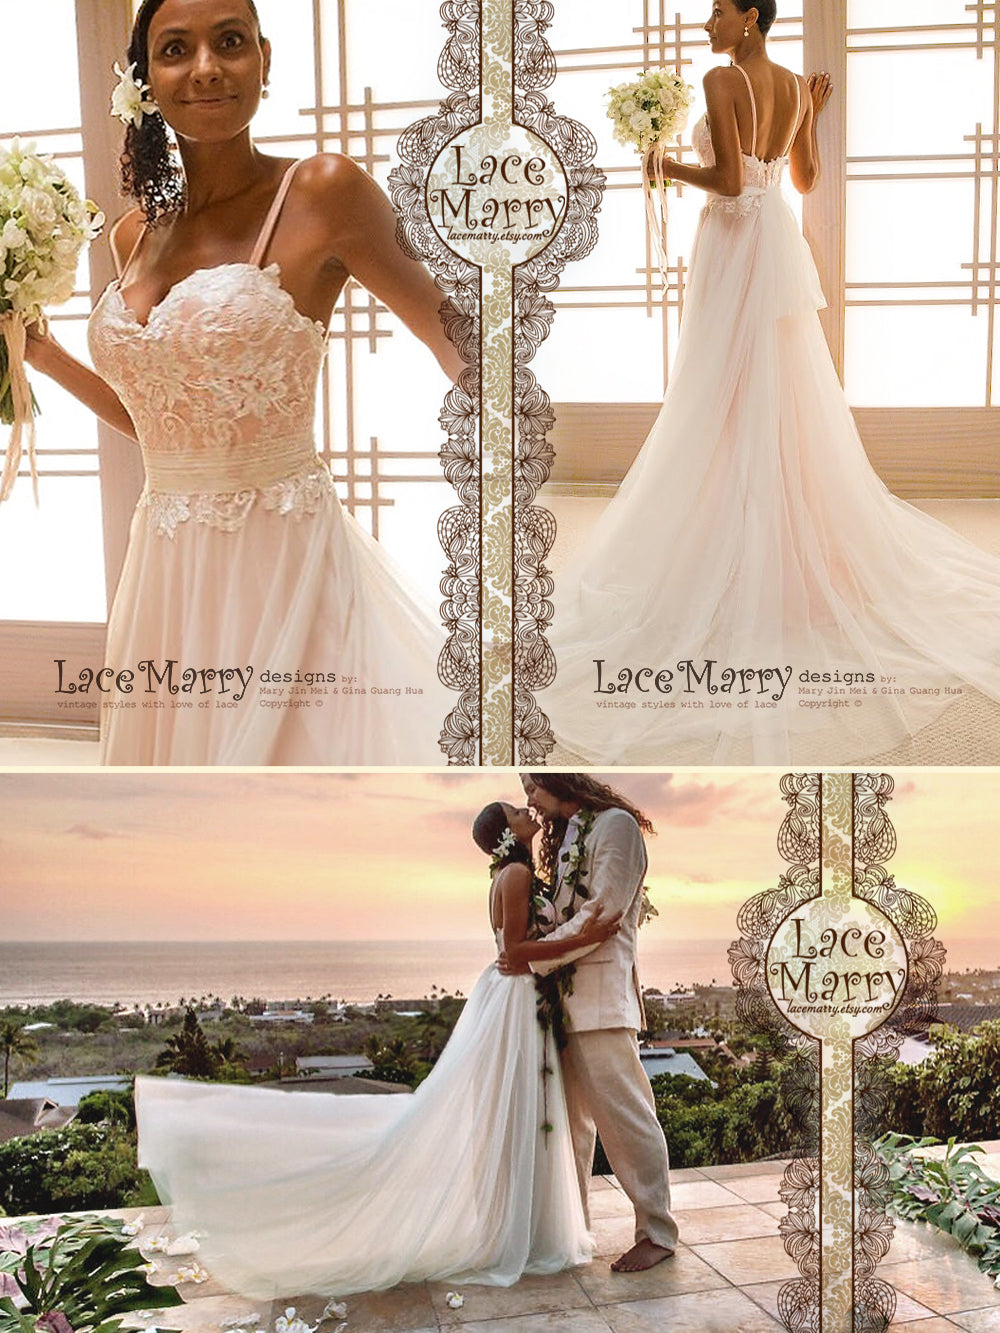 Rose Gold Beach Wedding Dress From Lace And Soft Tulle In Relaxed Silhouette With Sexy Sweetheart Neckline Spaghetti Straps And Small Train